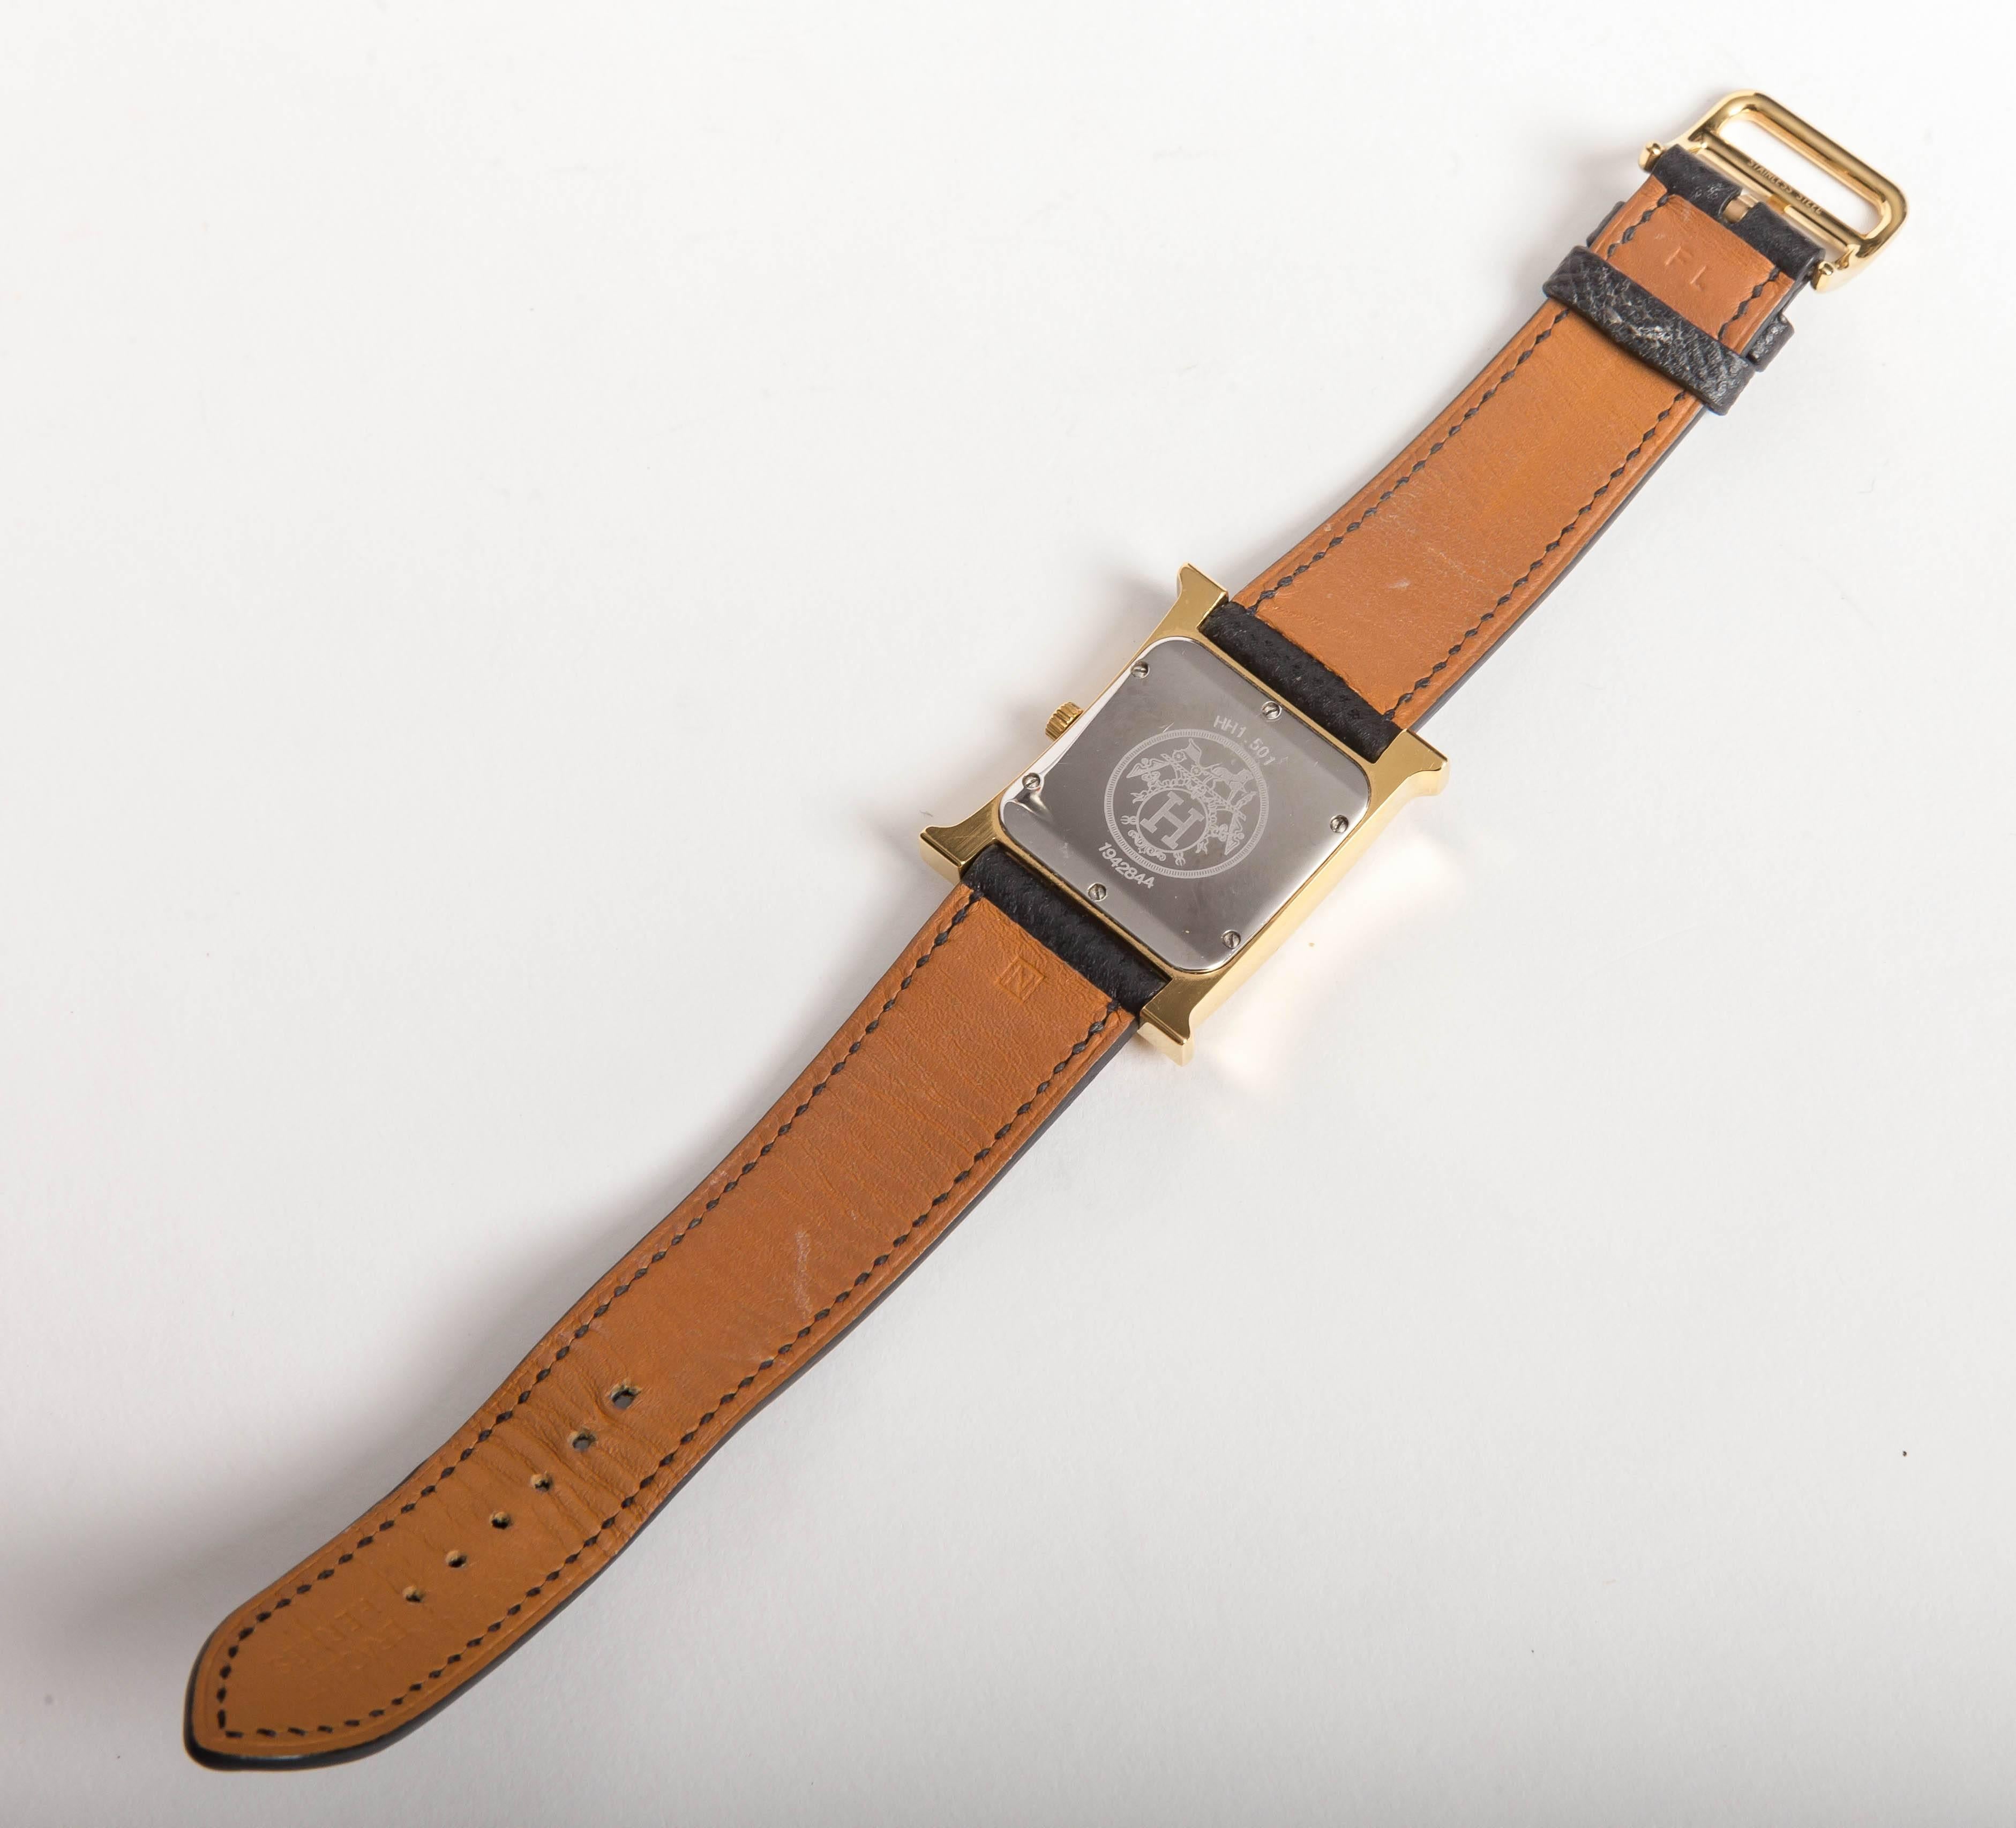 Hermes Heure H Watch in Goldtone Stainless Steel on a Grained Leather Strap 2